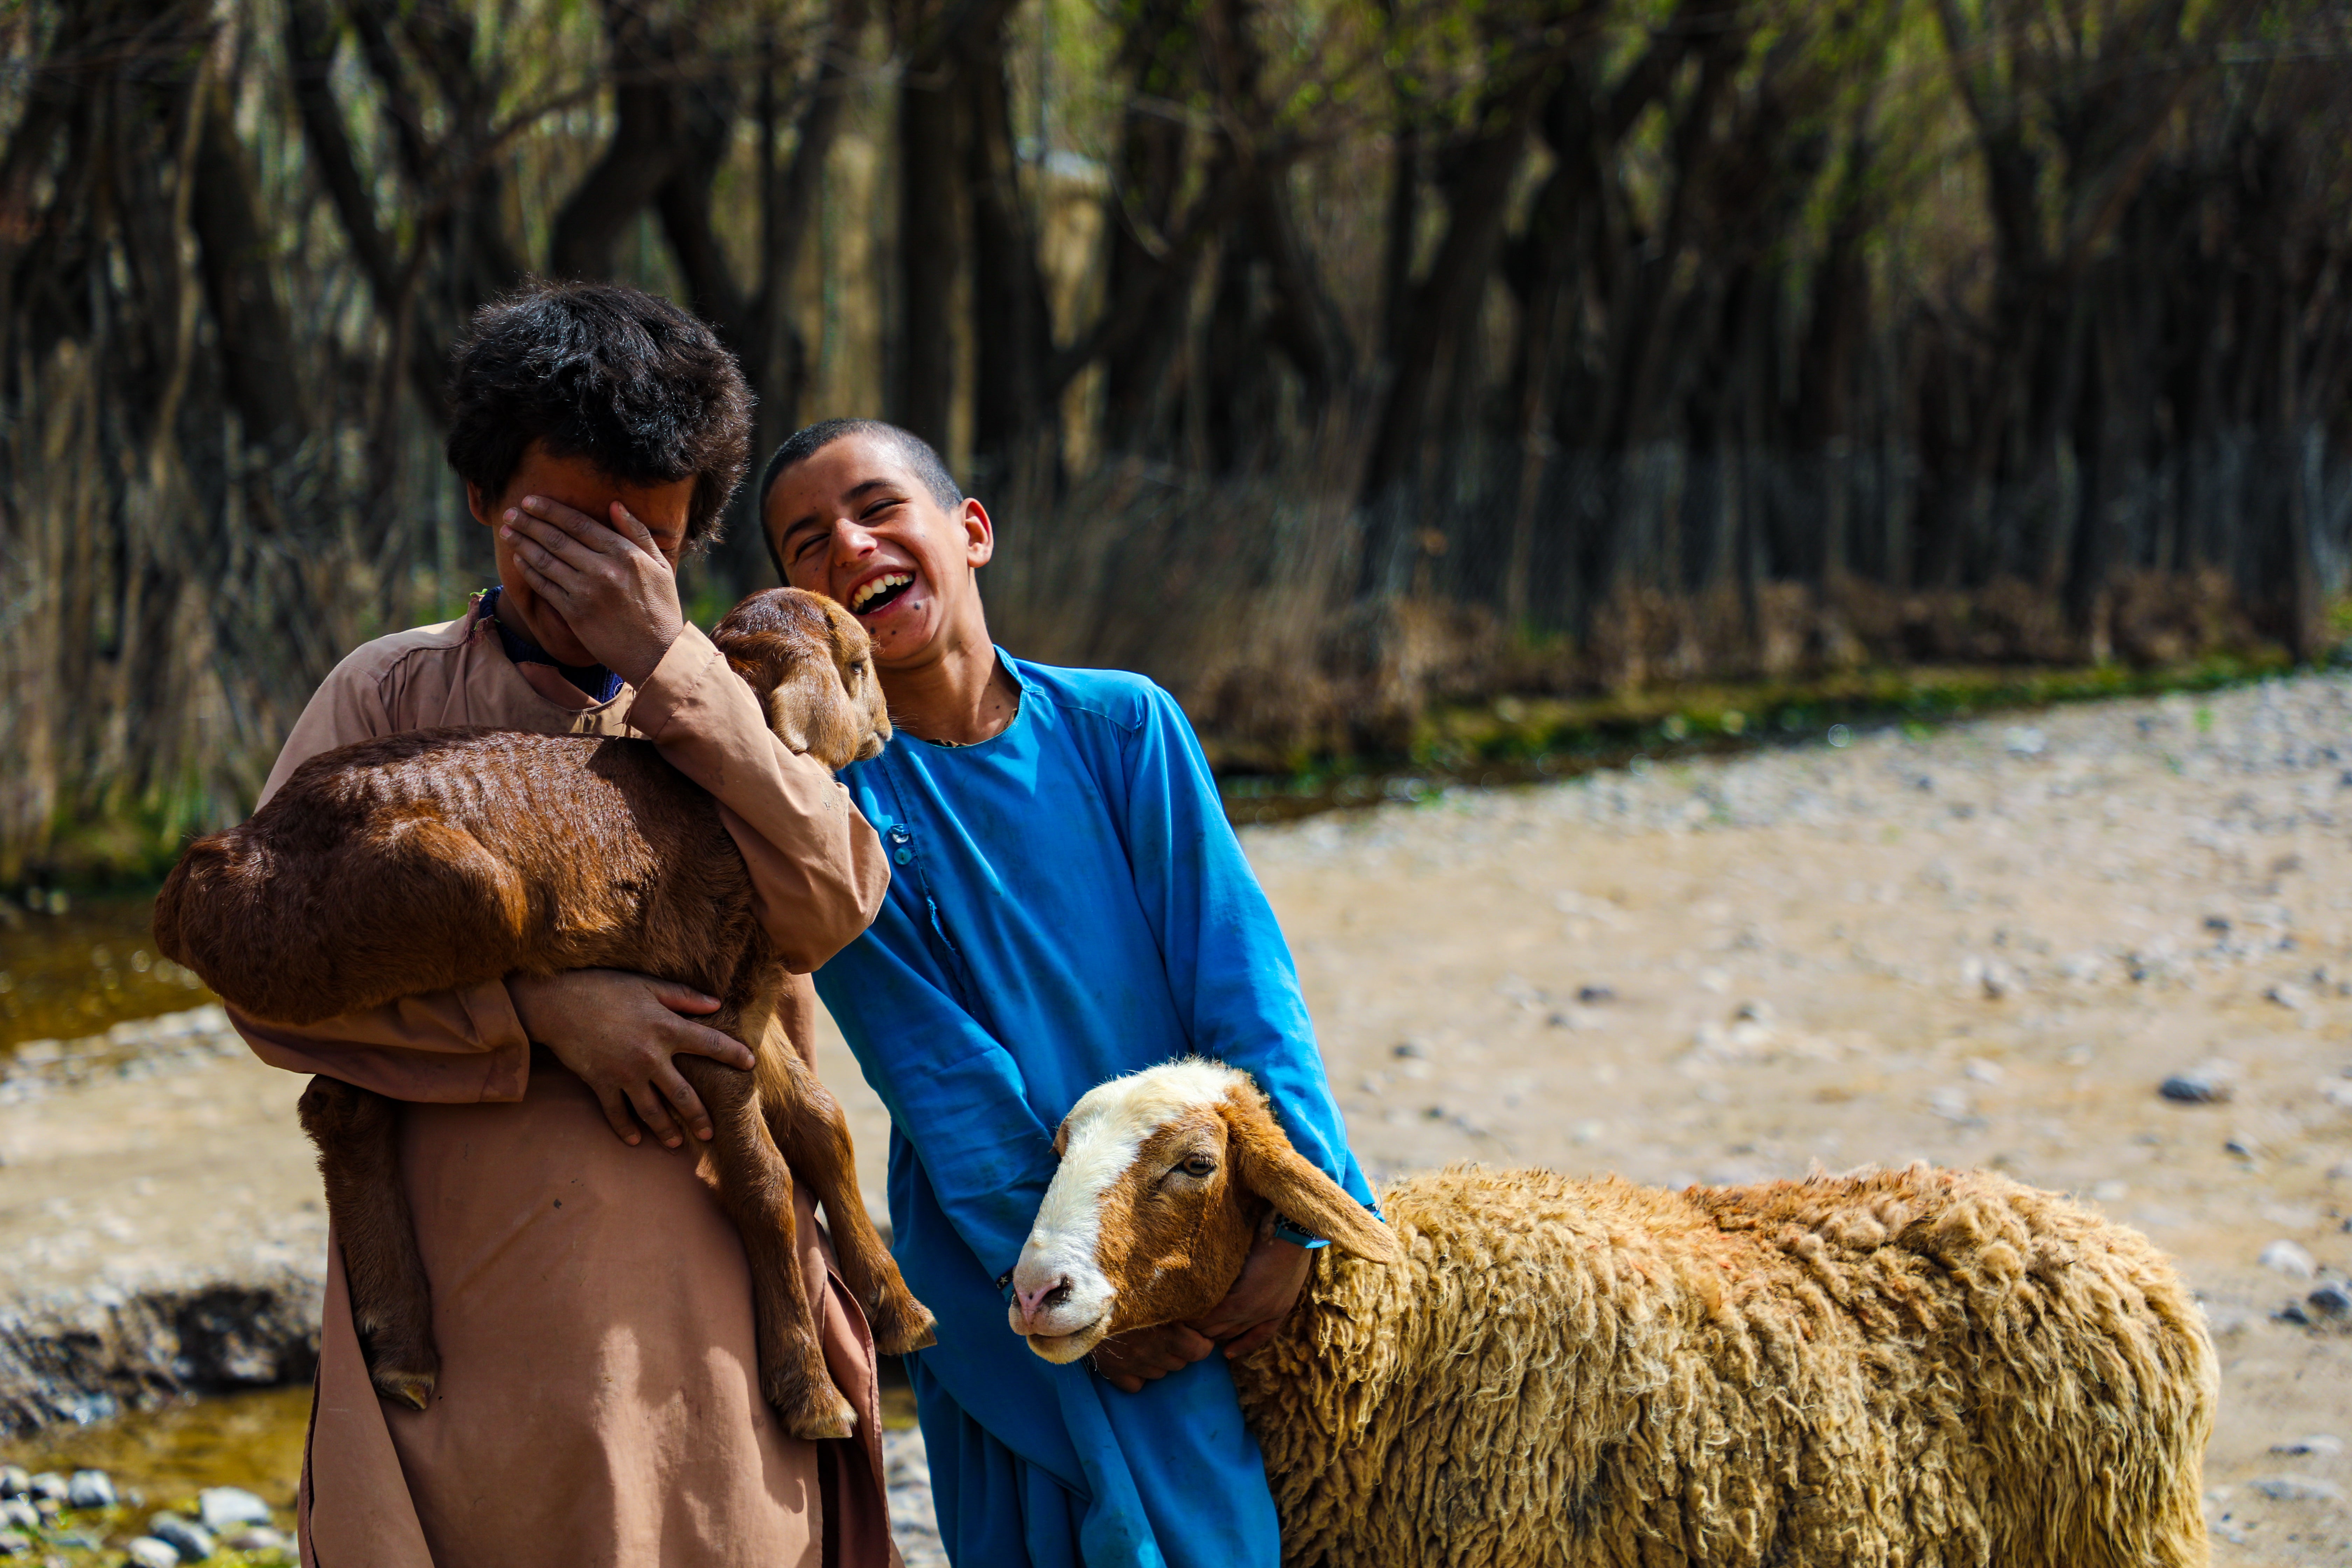 In Afghanistan, two boys laugh with one another. One boy covers his face with his hand and holds a lamb, the other has his hand on a sheep. 